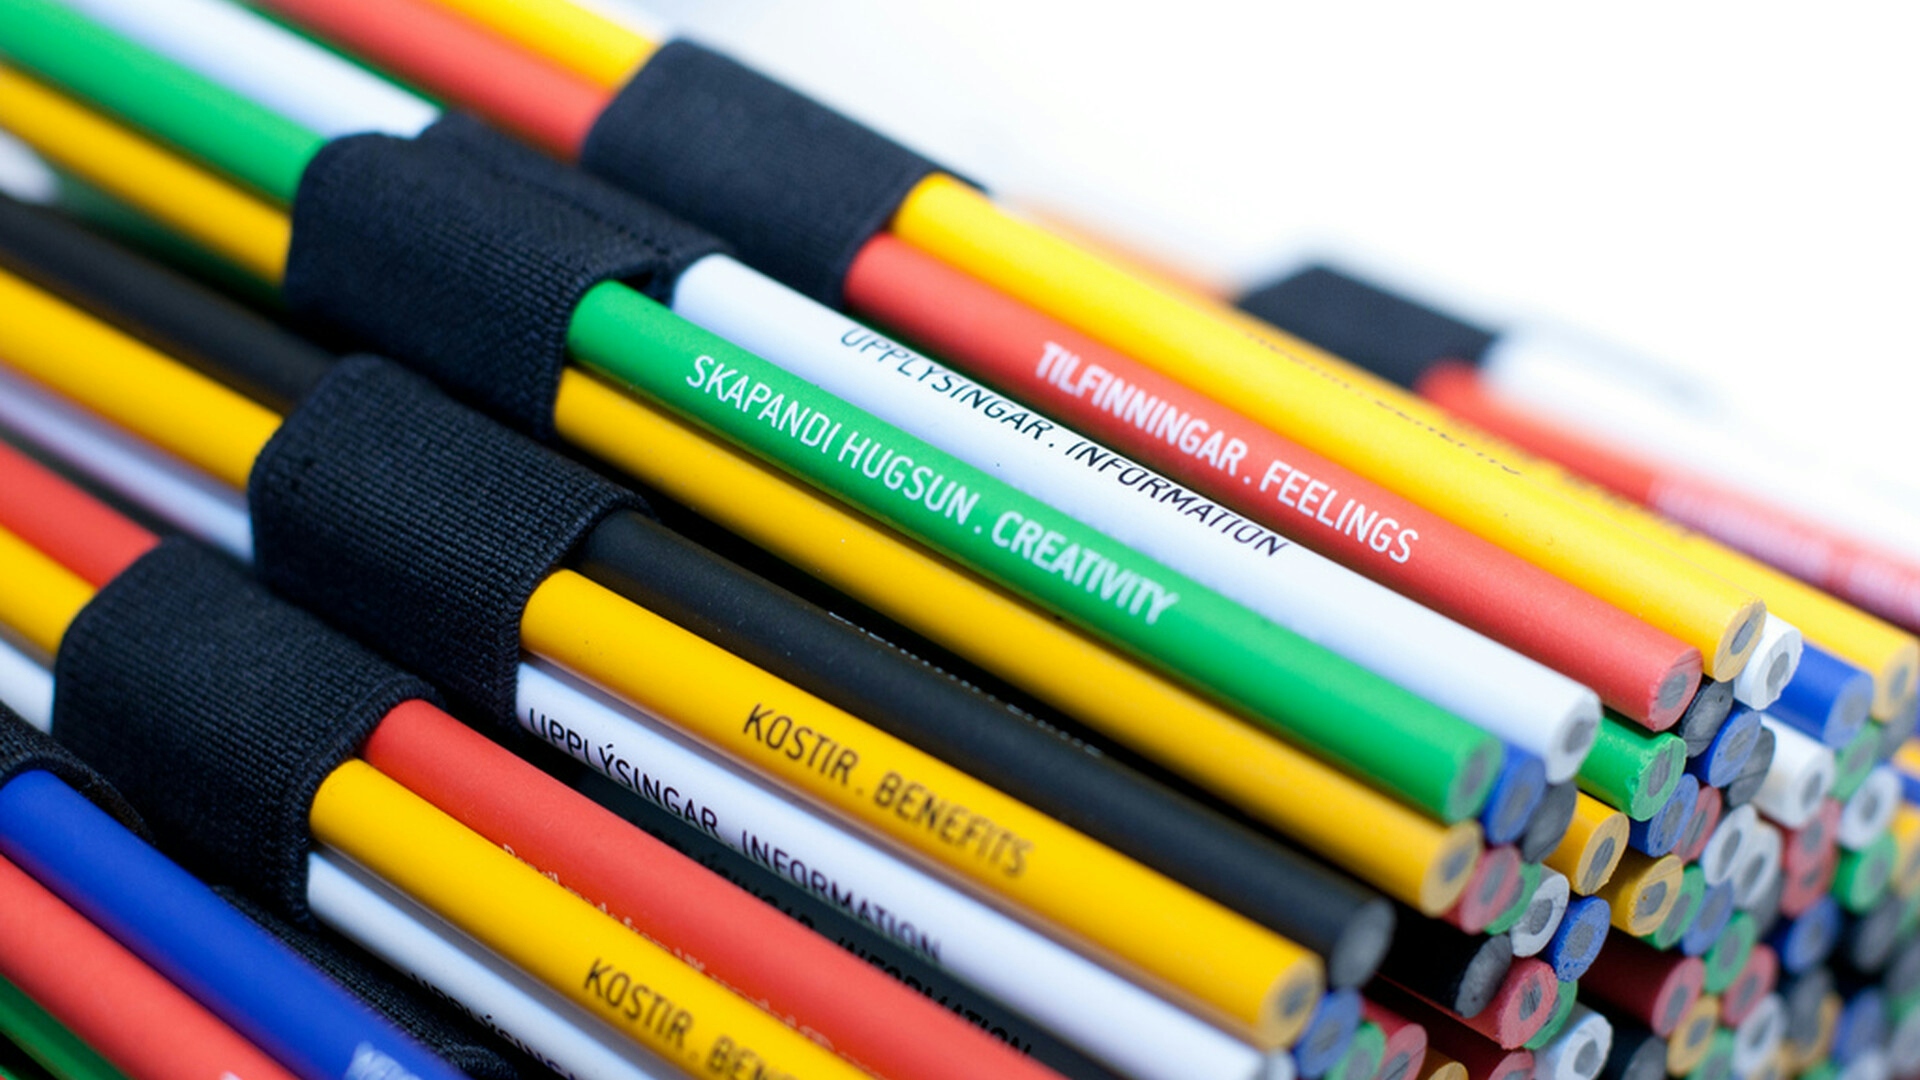 The pencils are color-coded and each color stands for a certain direction of thinking. Each participant selects one pencil and then approaches the discussion with a mindset matching the pencil's color. 